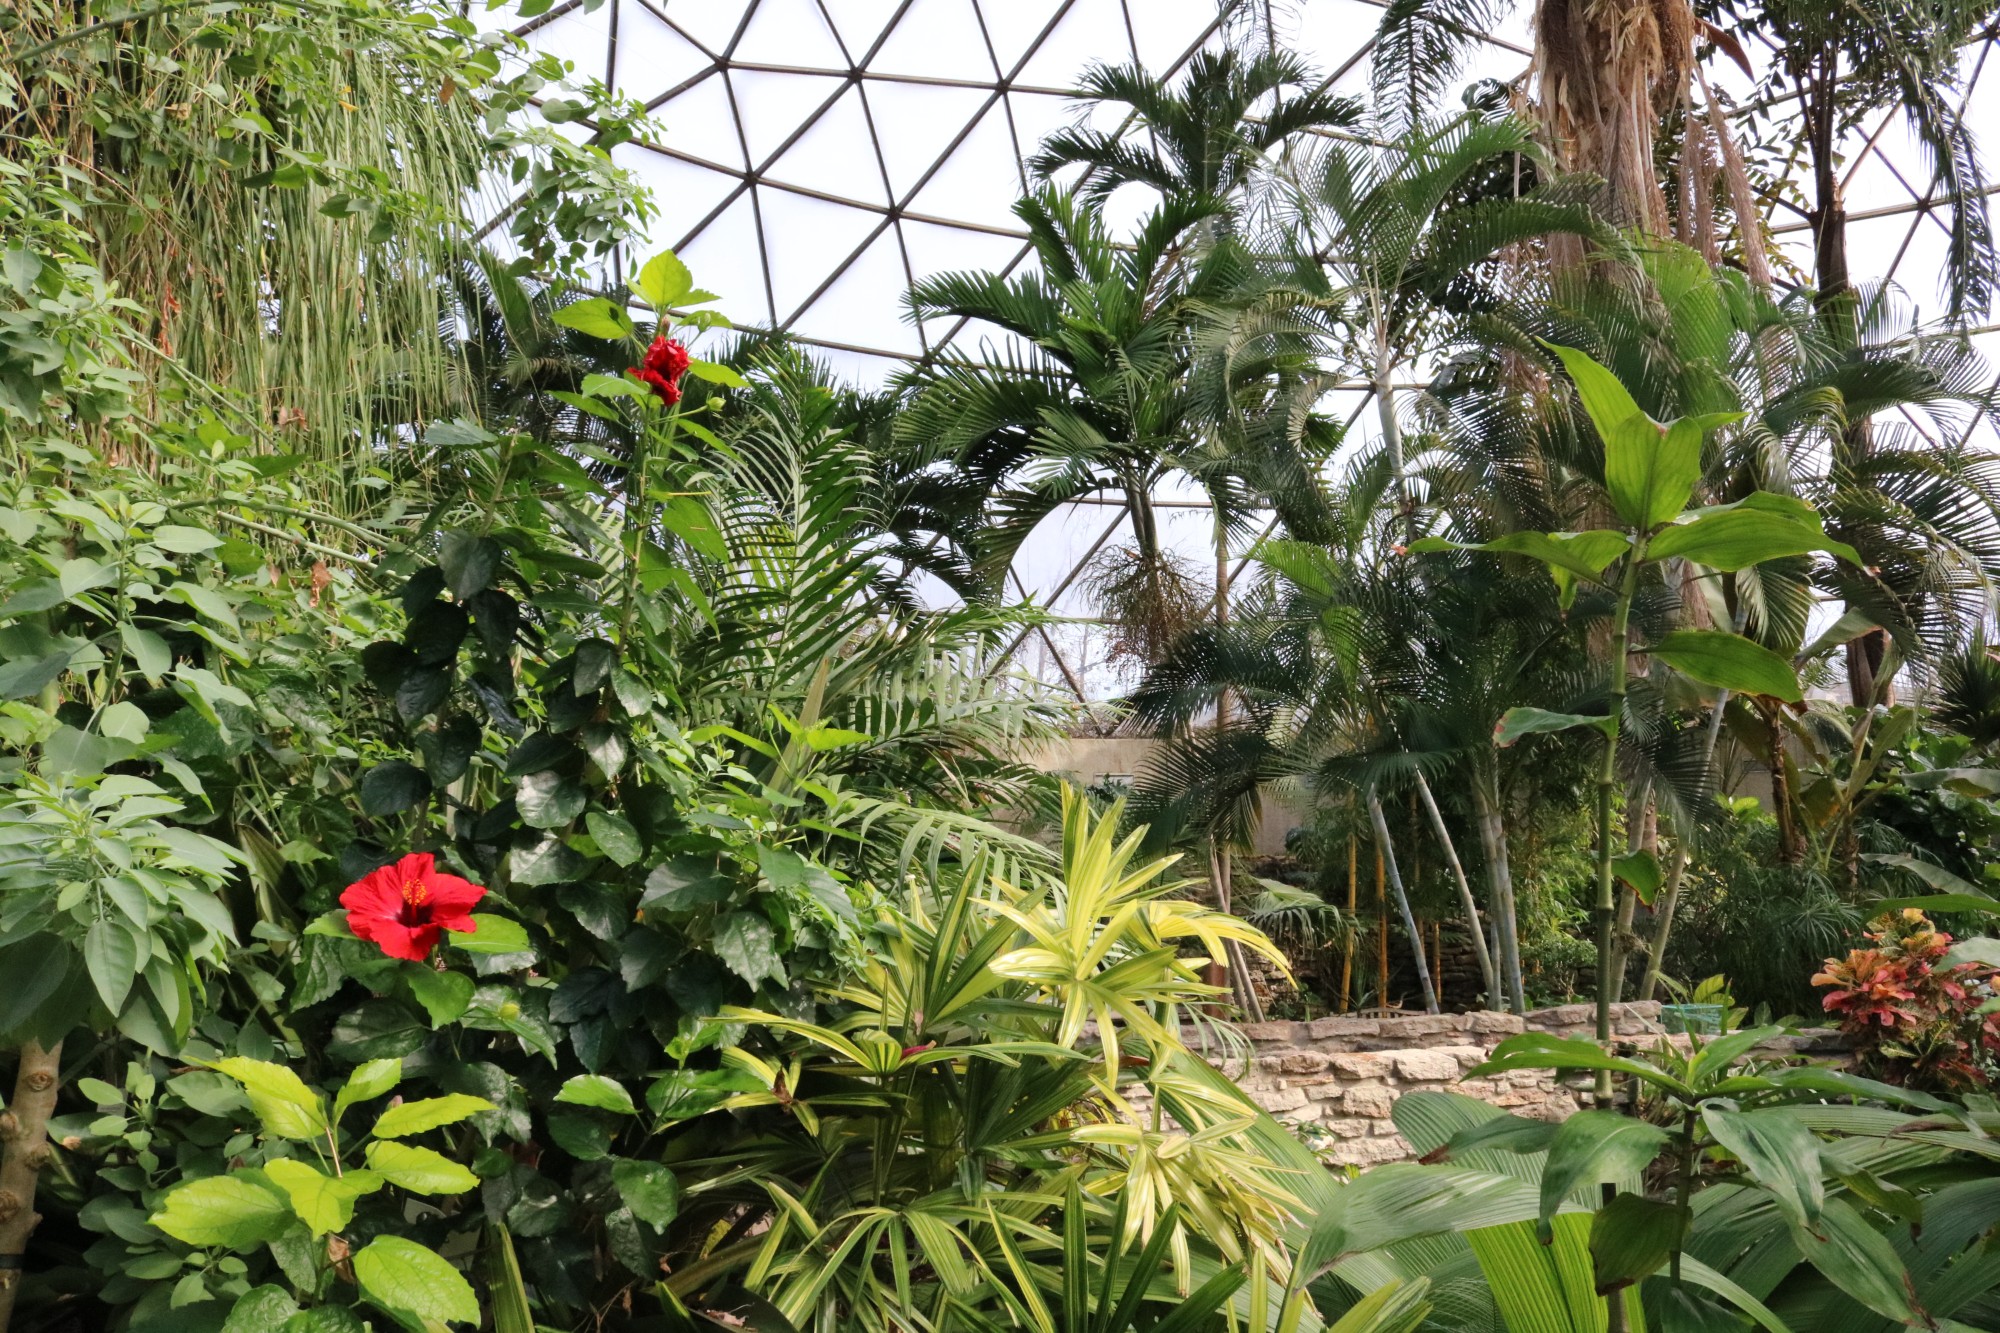 Conservatory, February 2018. Photo by Leslie Hunter.